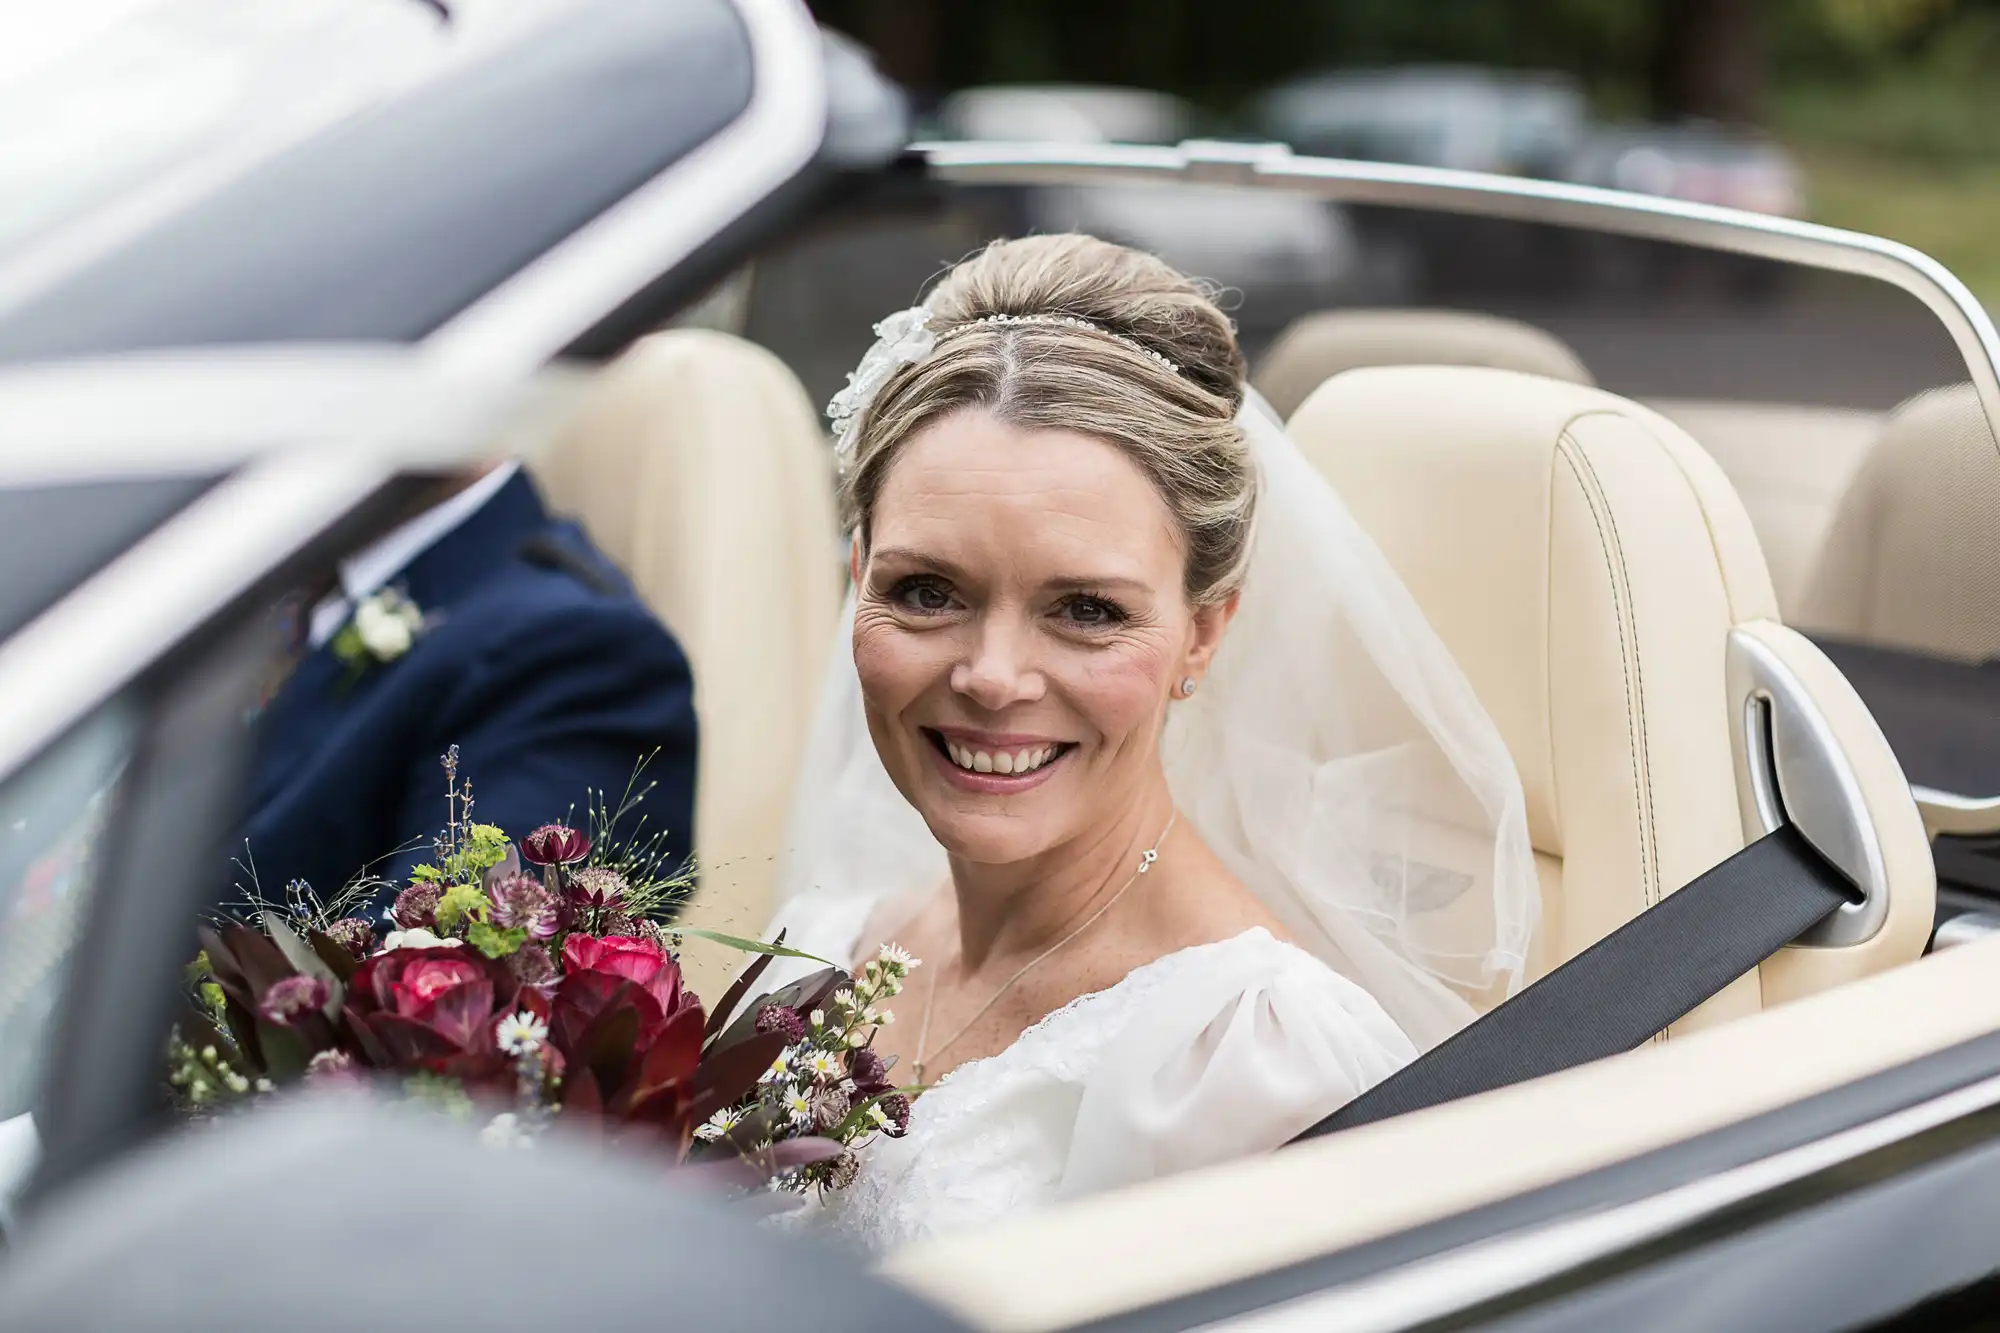 A smiling bride in a white dress and veil sits in a convertible car, holding a bouquet of flowers, ready to depart.